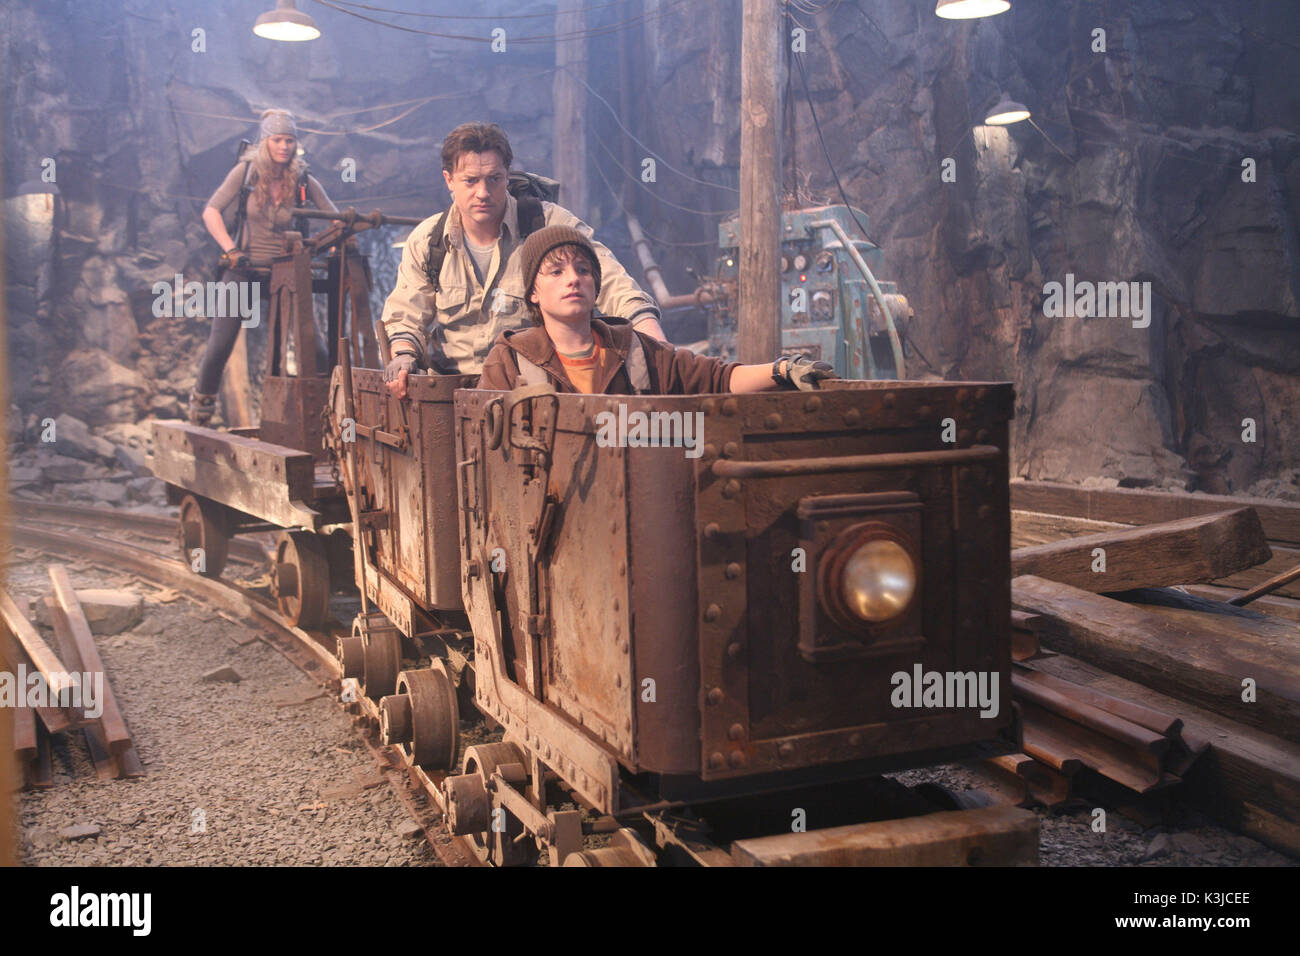 JOURNEY TO THE CENTER OF THE EARTH 3D ANITA BRIEM, BRENDAN FRASER, JOSH HUTCHERSON JOURNEY TO THE CENTER OF THE EARTH 3D     Date: 2008 Stock Photo